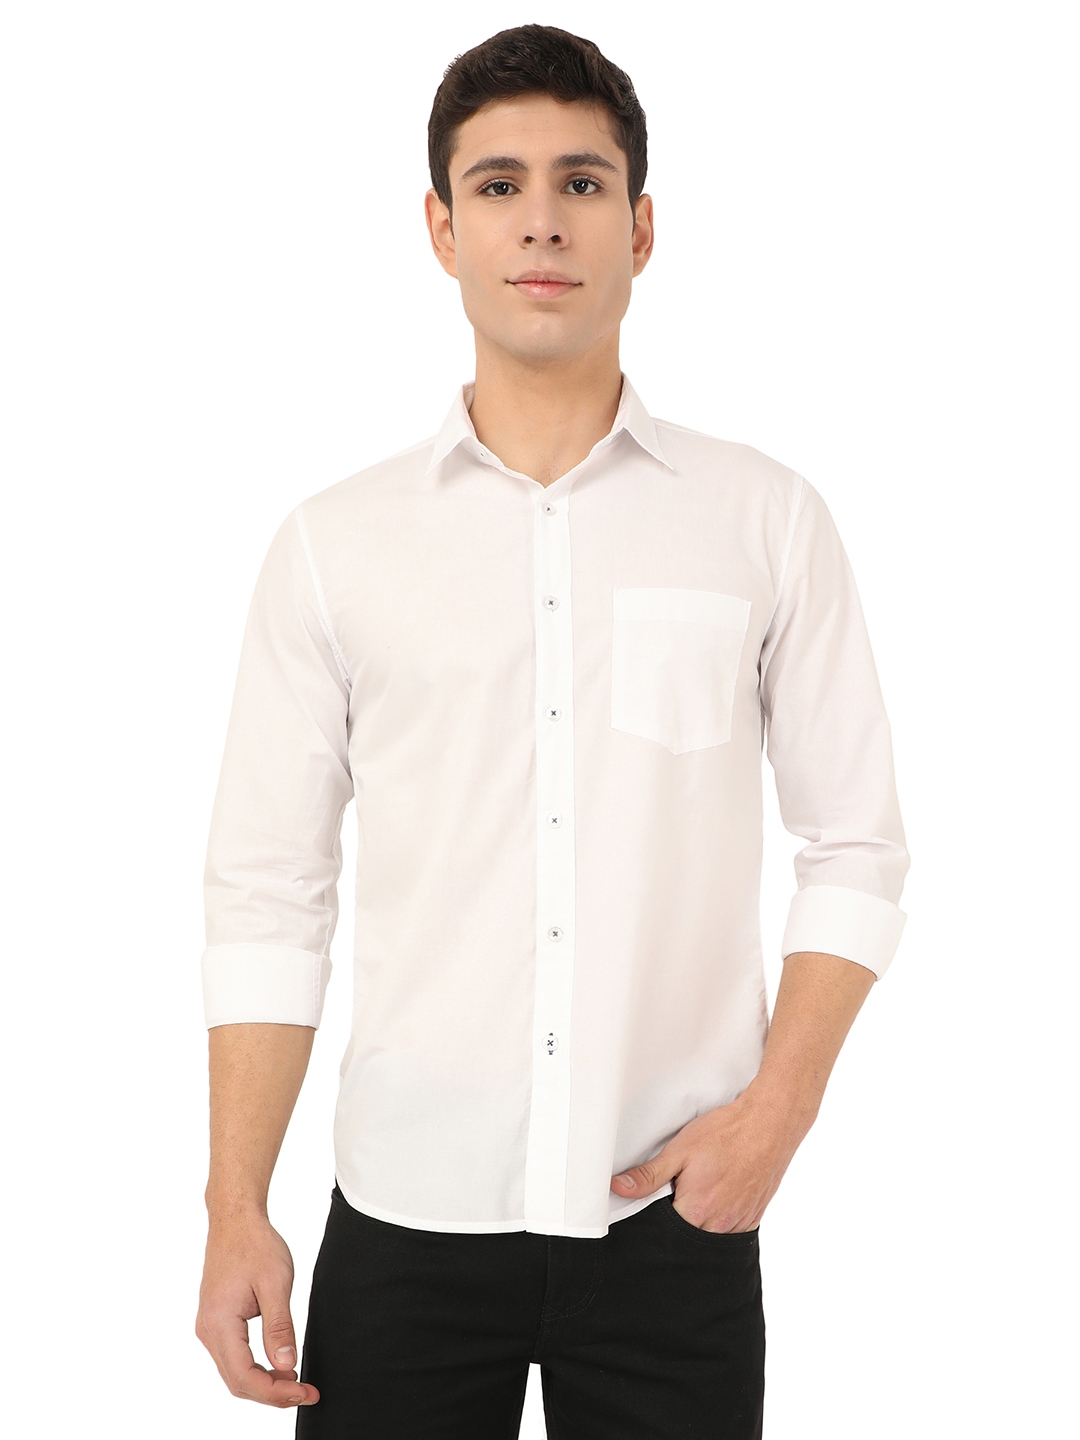 Greenfibre | Bright White Solid Slim Fit Semi Casual Shirt | Greenfibre